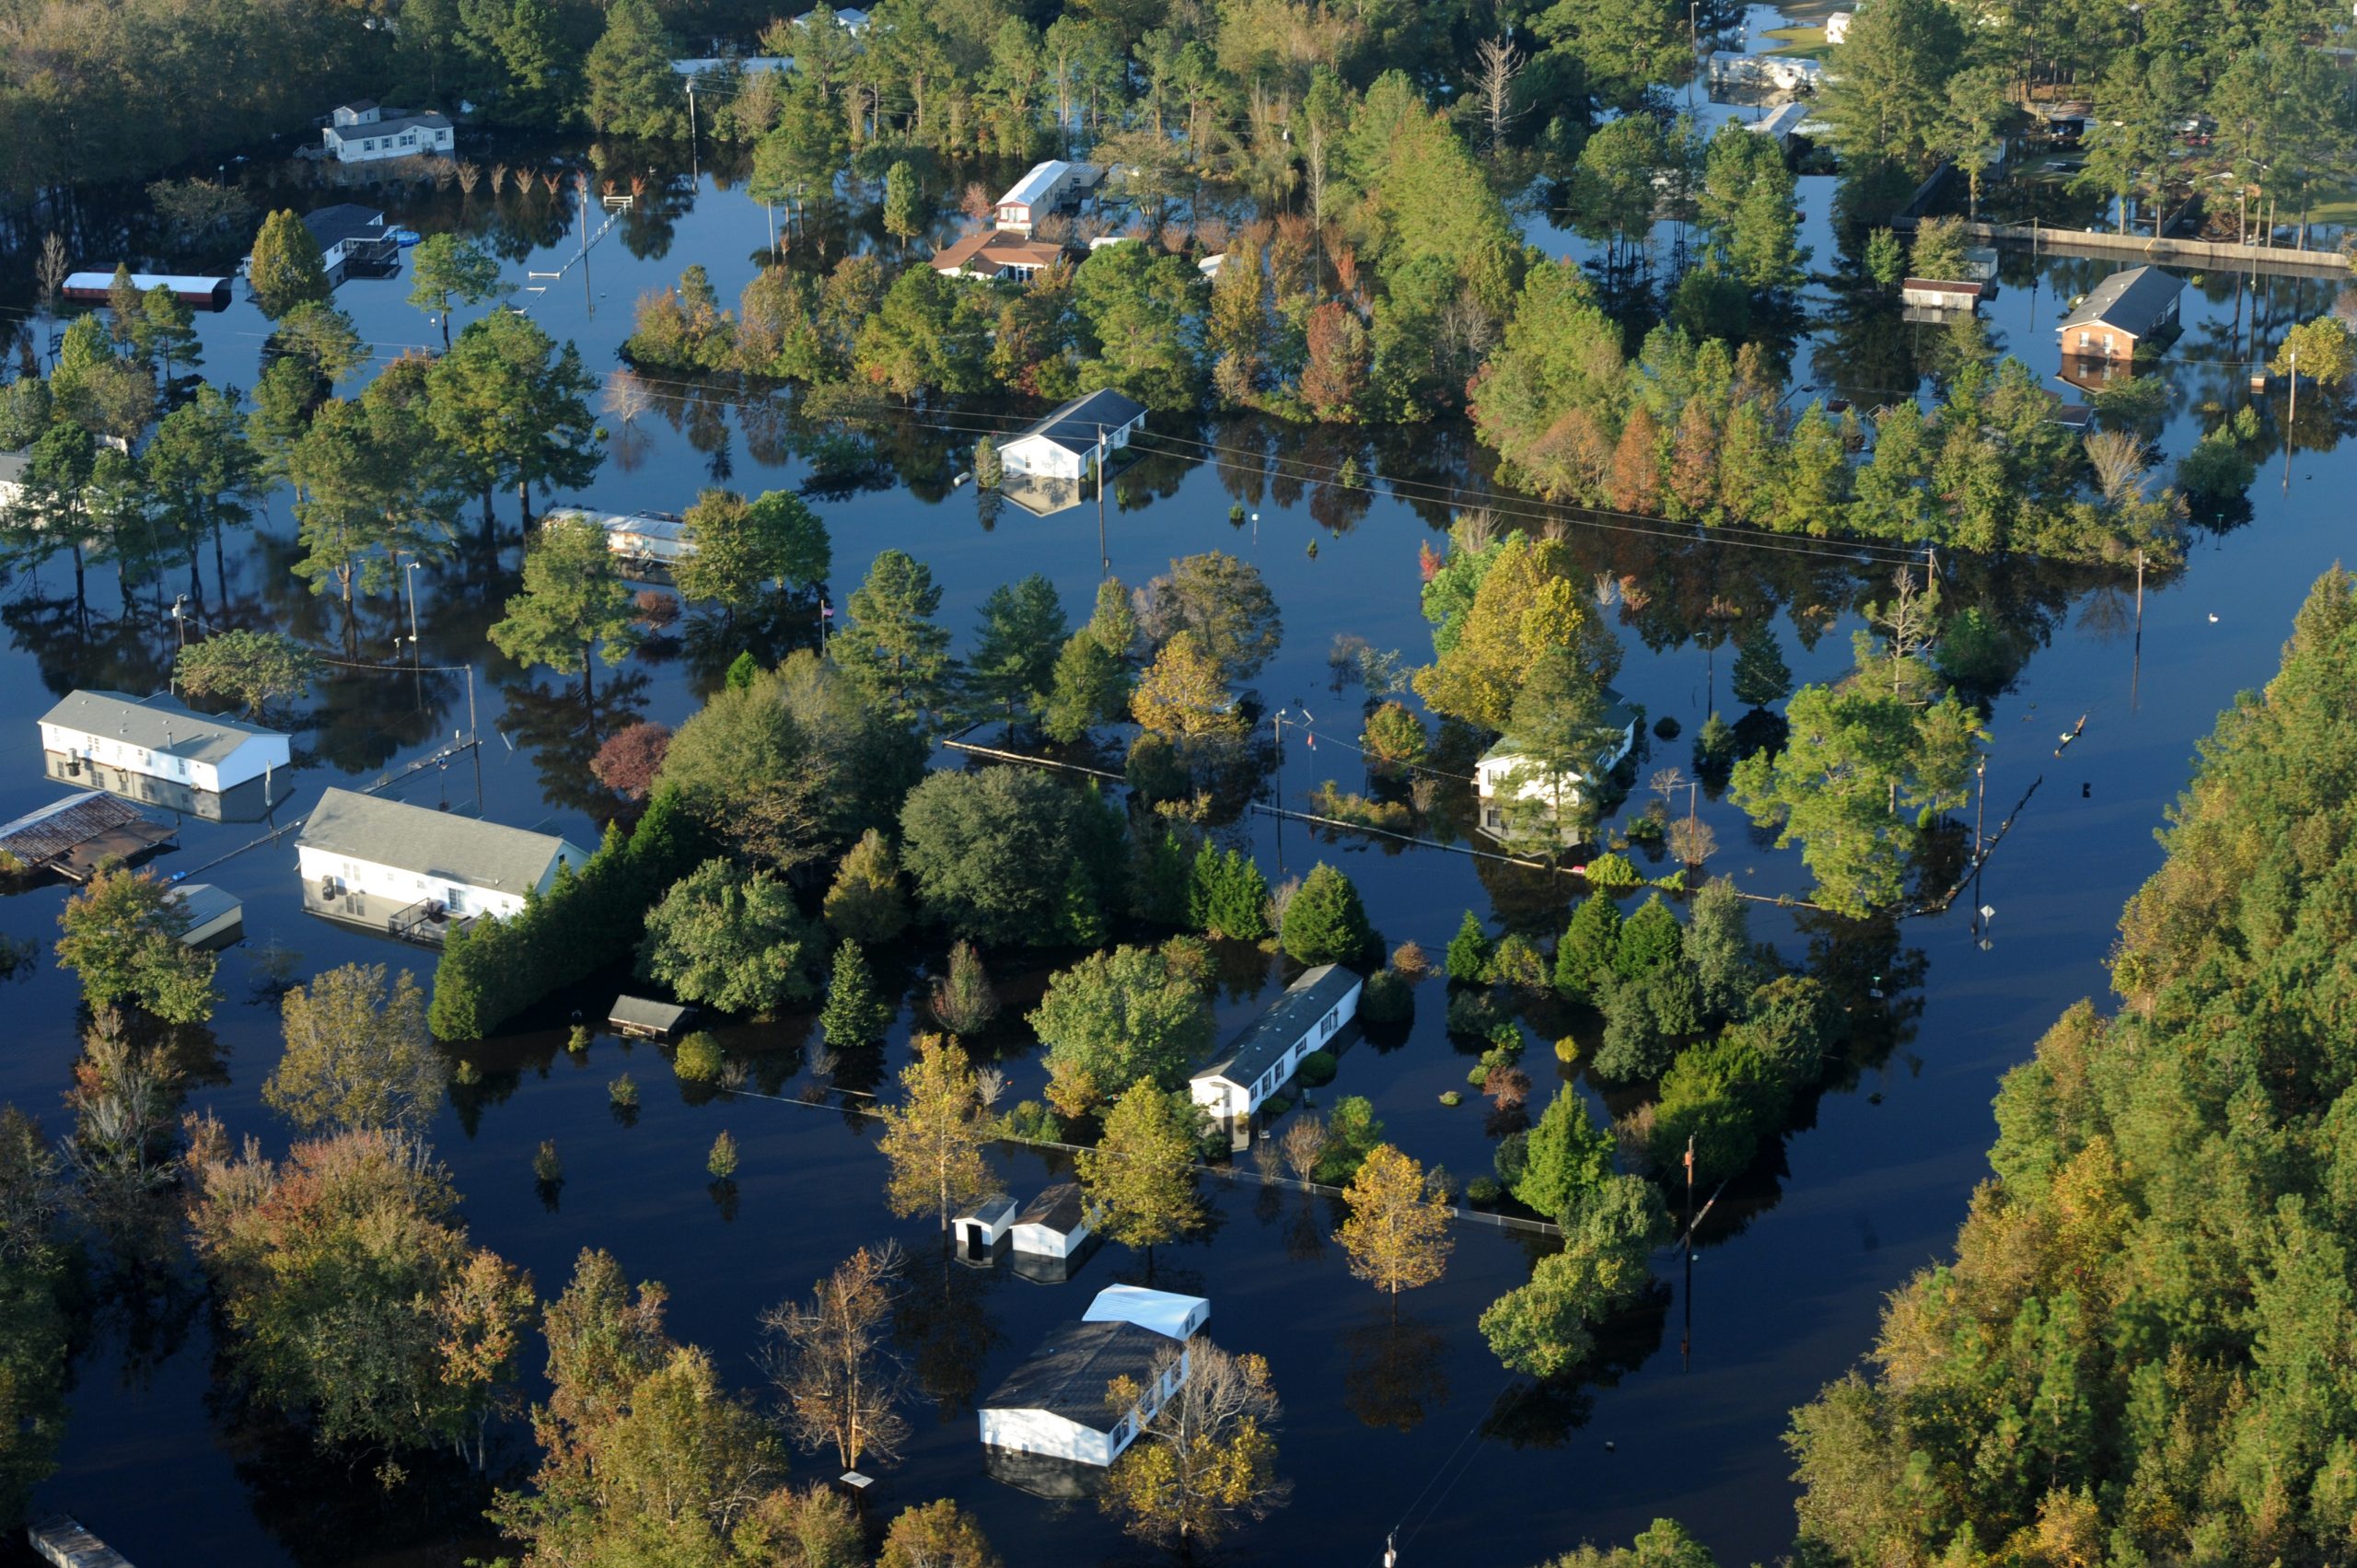 Floodwaters from Hurricane Matthew (2016) surround many houses in Craven County, N.C. Photo by Jocelyn Augustino/FEMA.